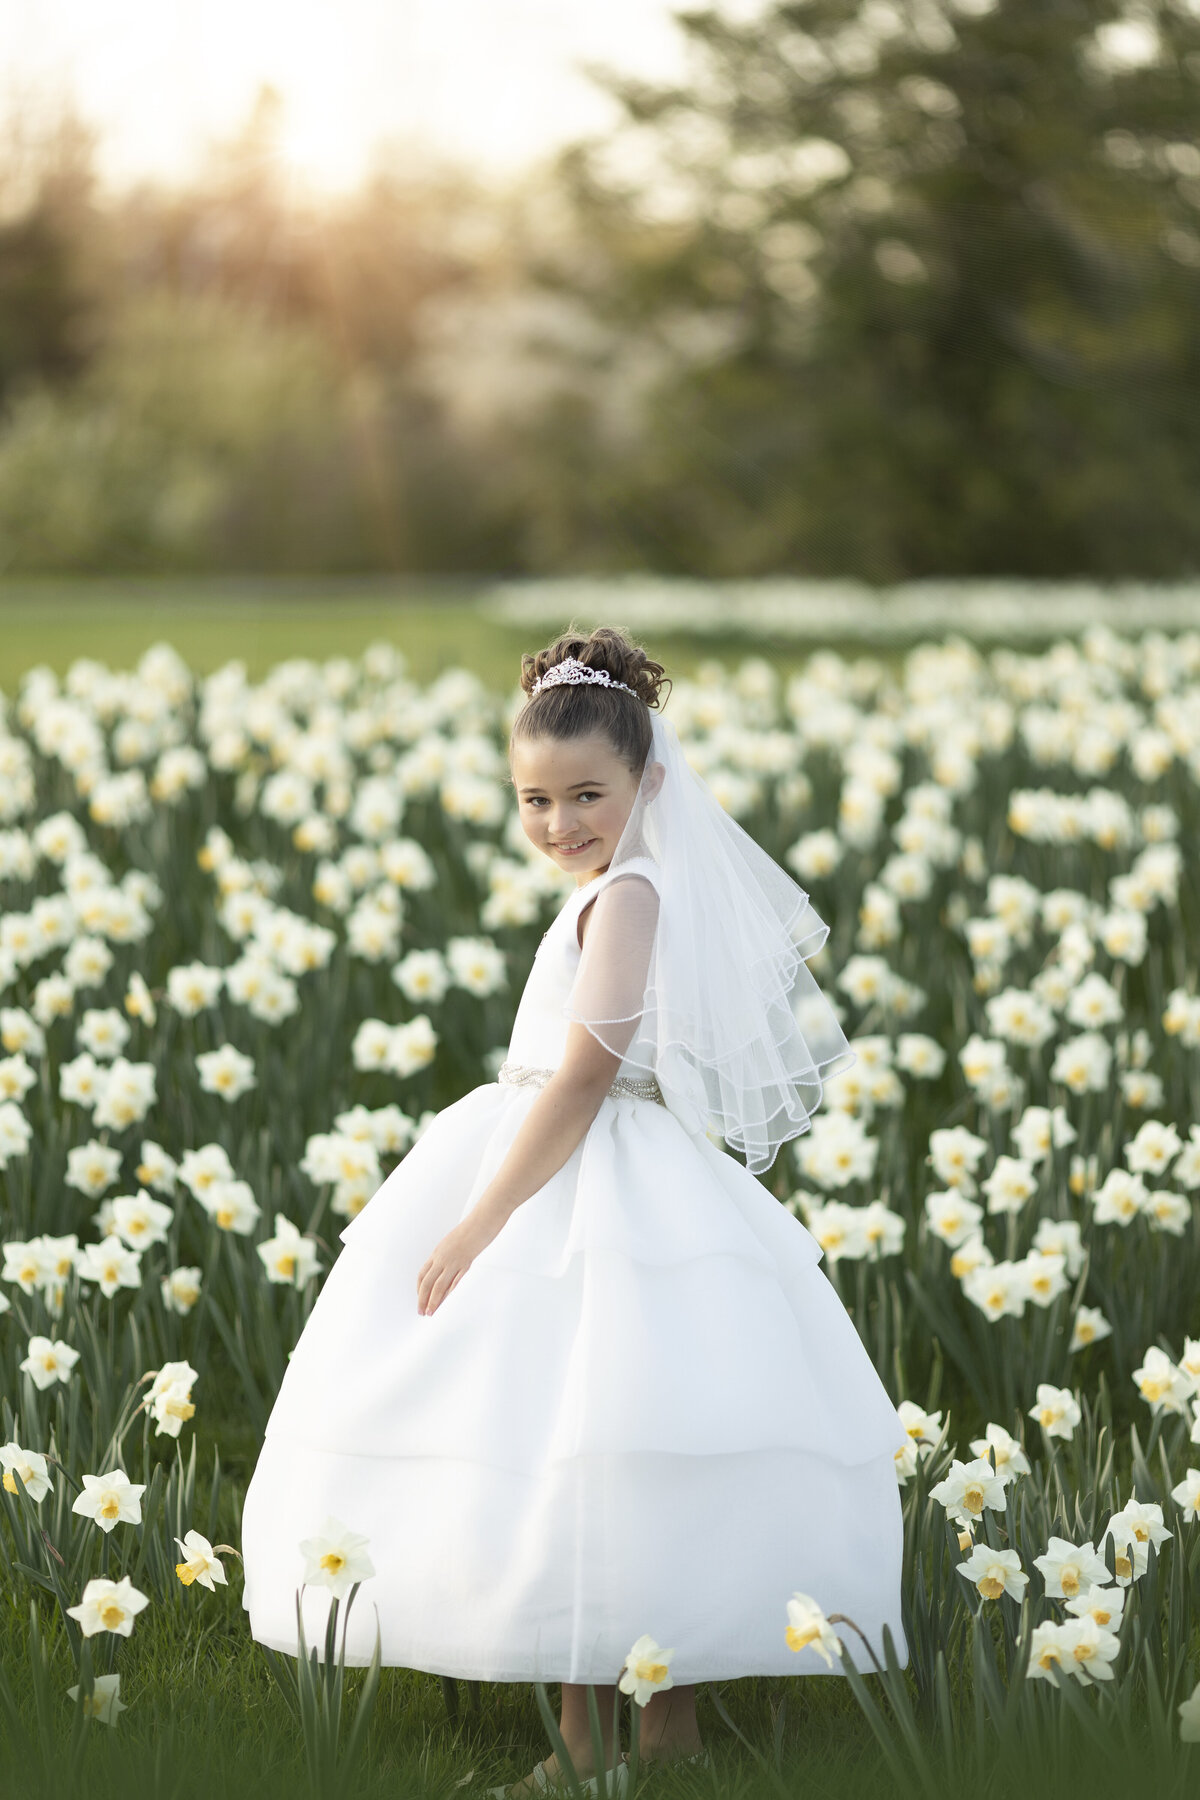 A girl in a white poofy dress walks through a field of white daffodils at sunset